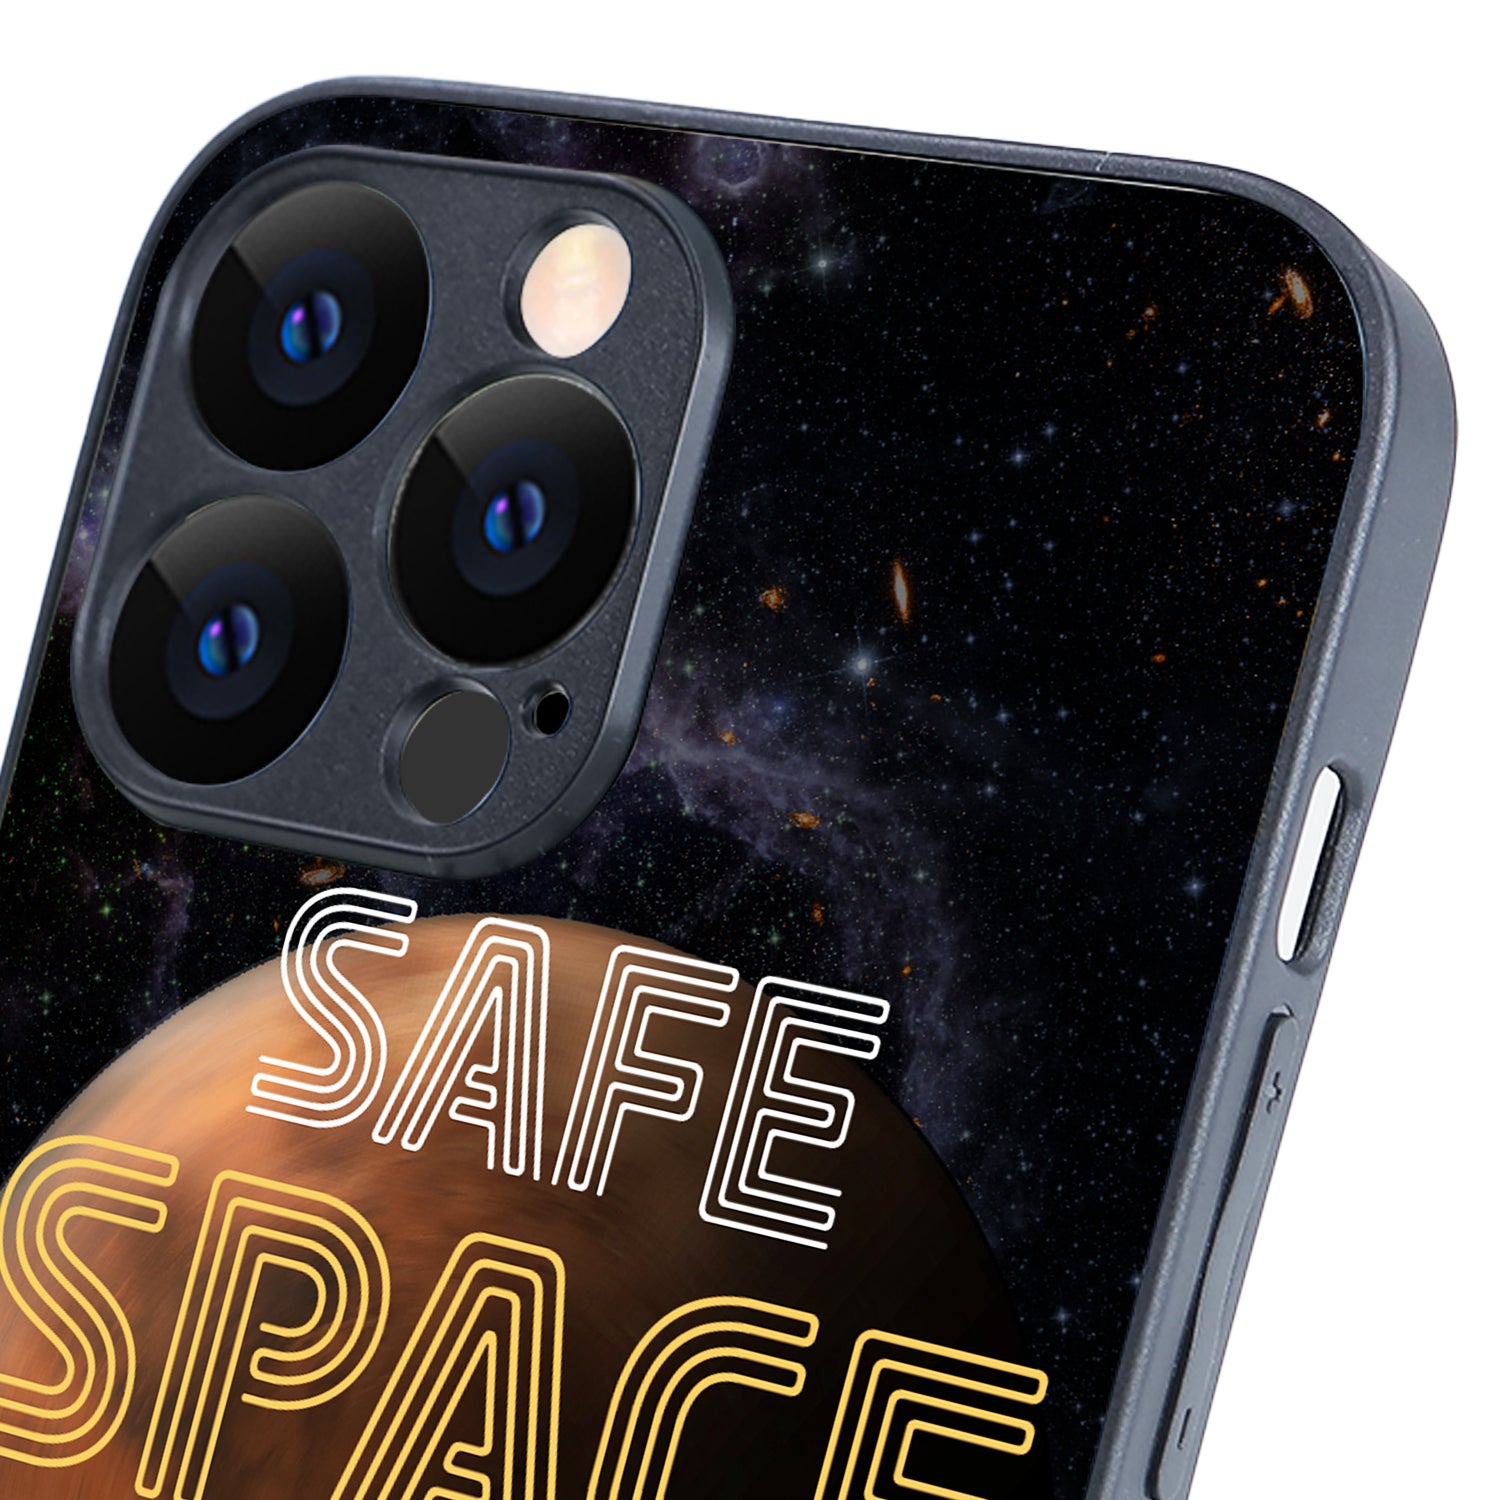 Safe Space iPhone 13 Pro Max Case